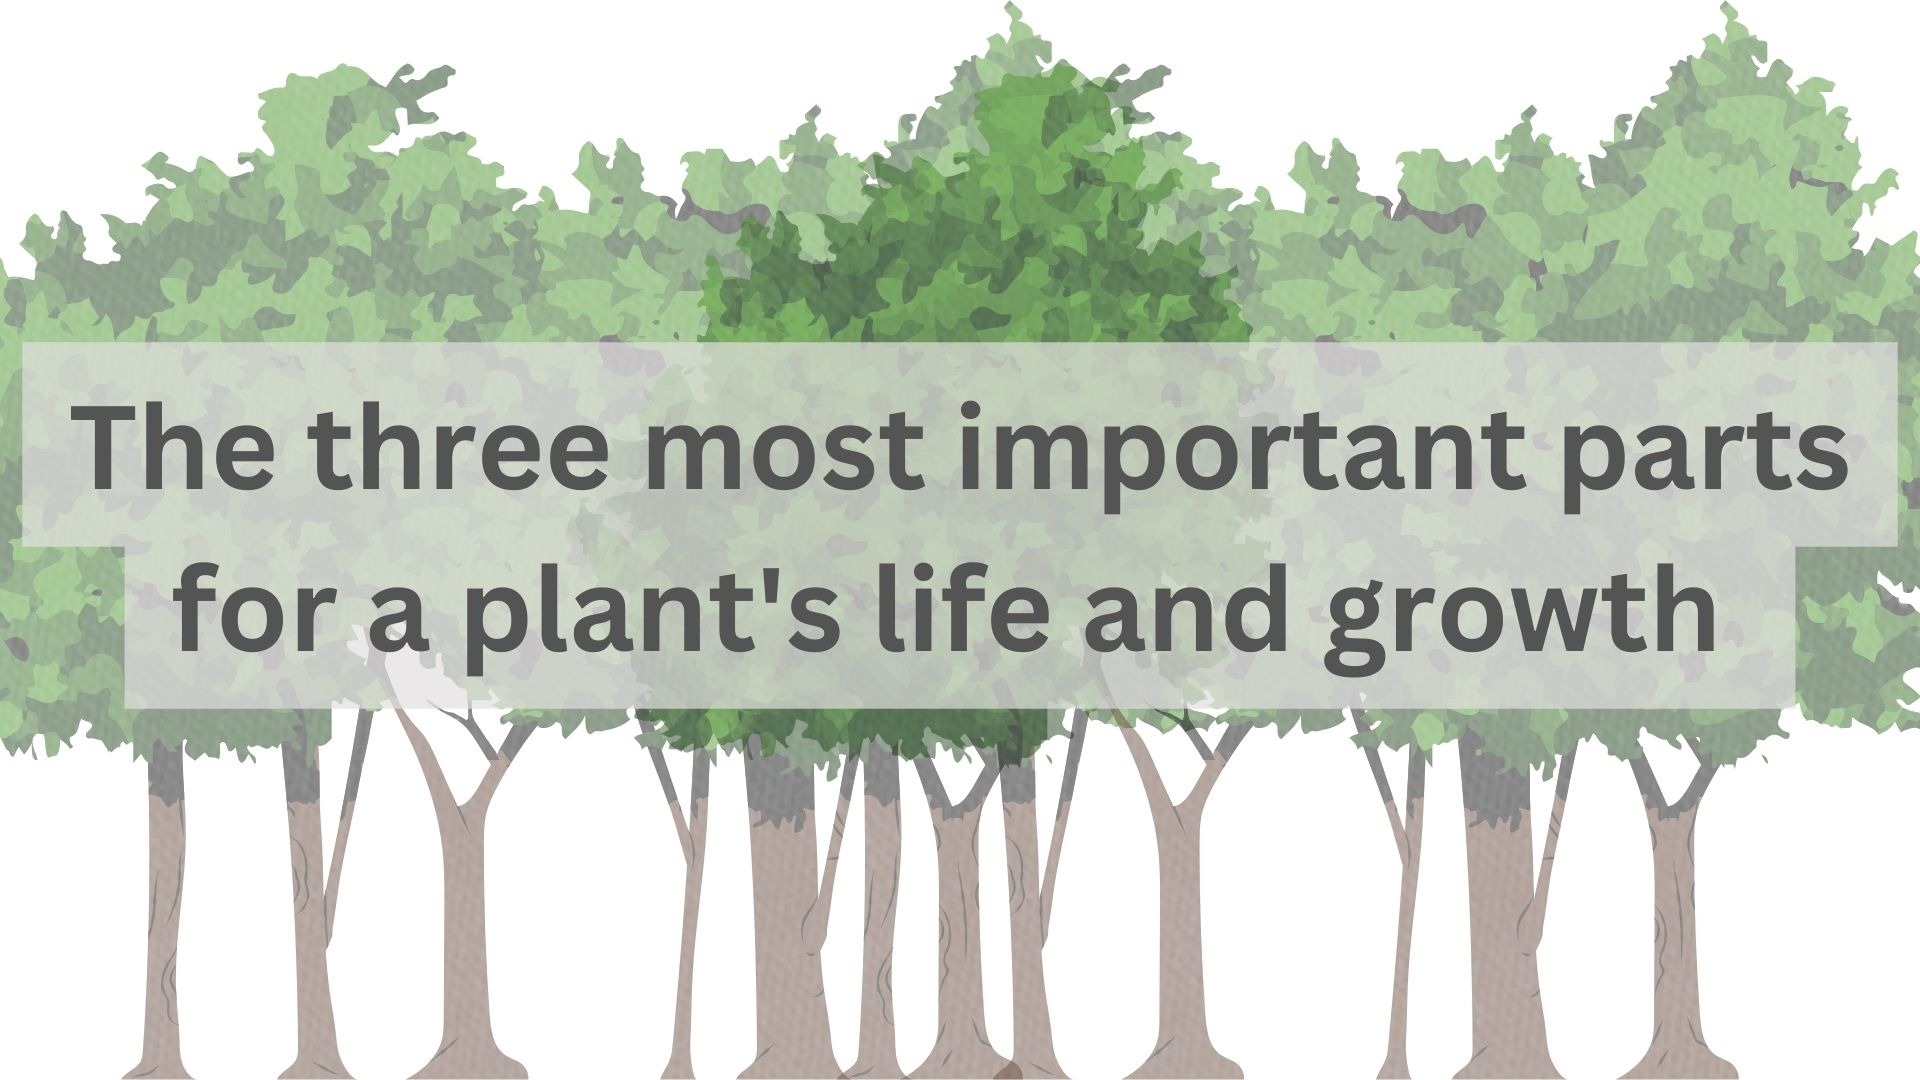 You are currently viewing The three most important parts for a plant’s life and growth